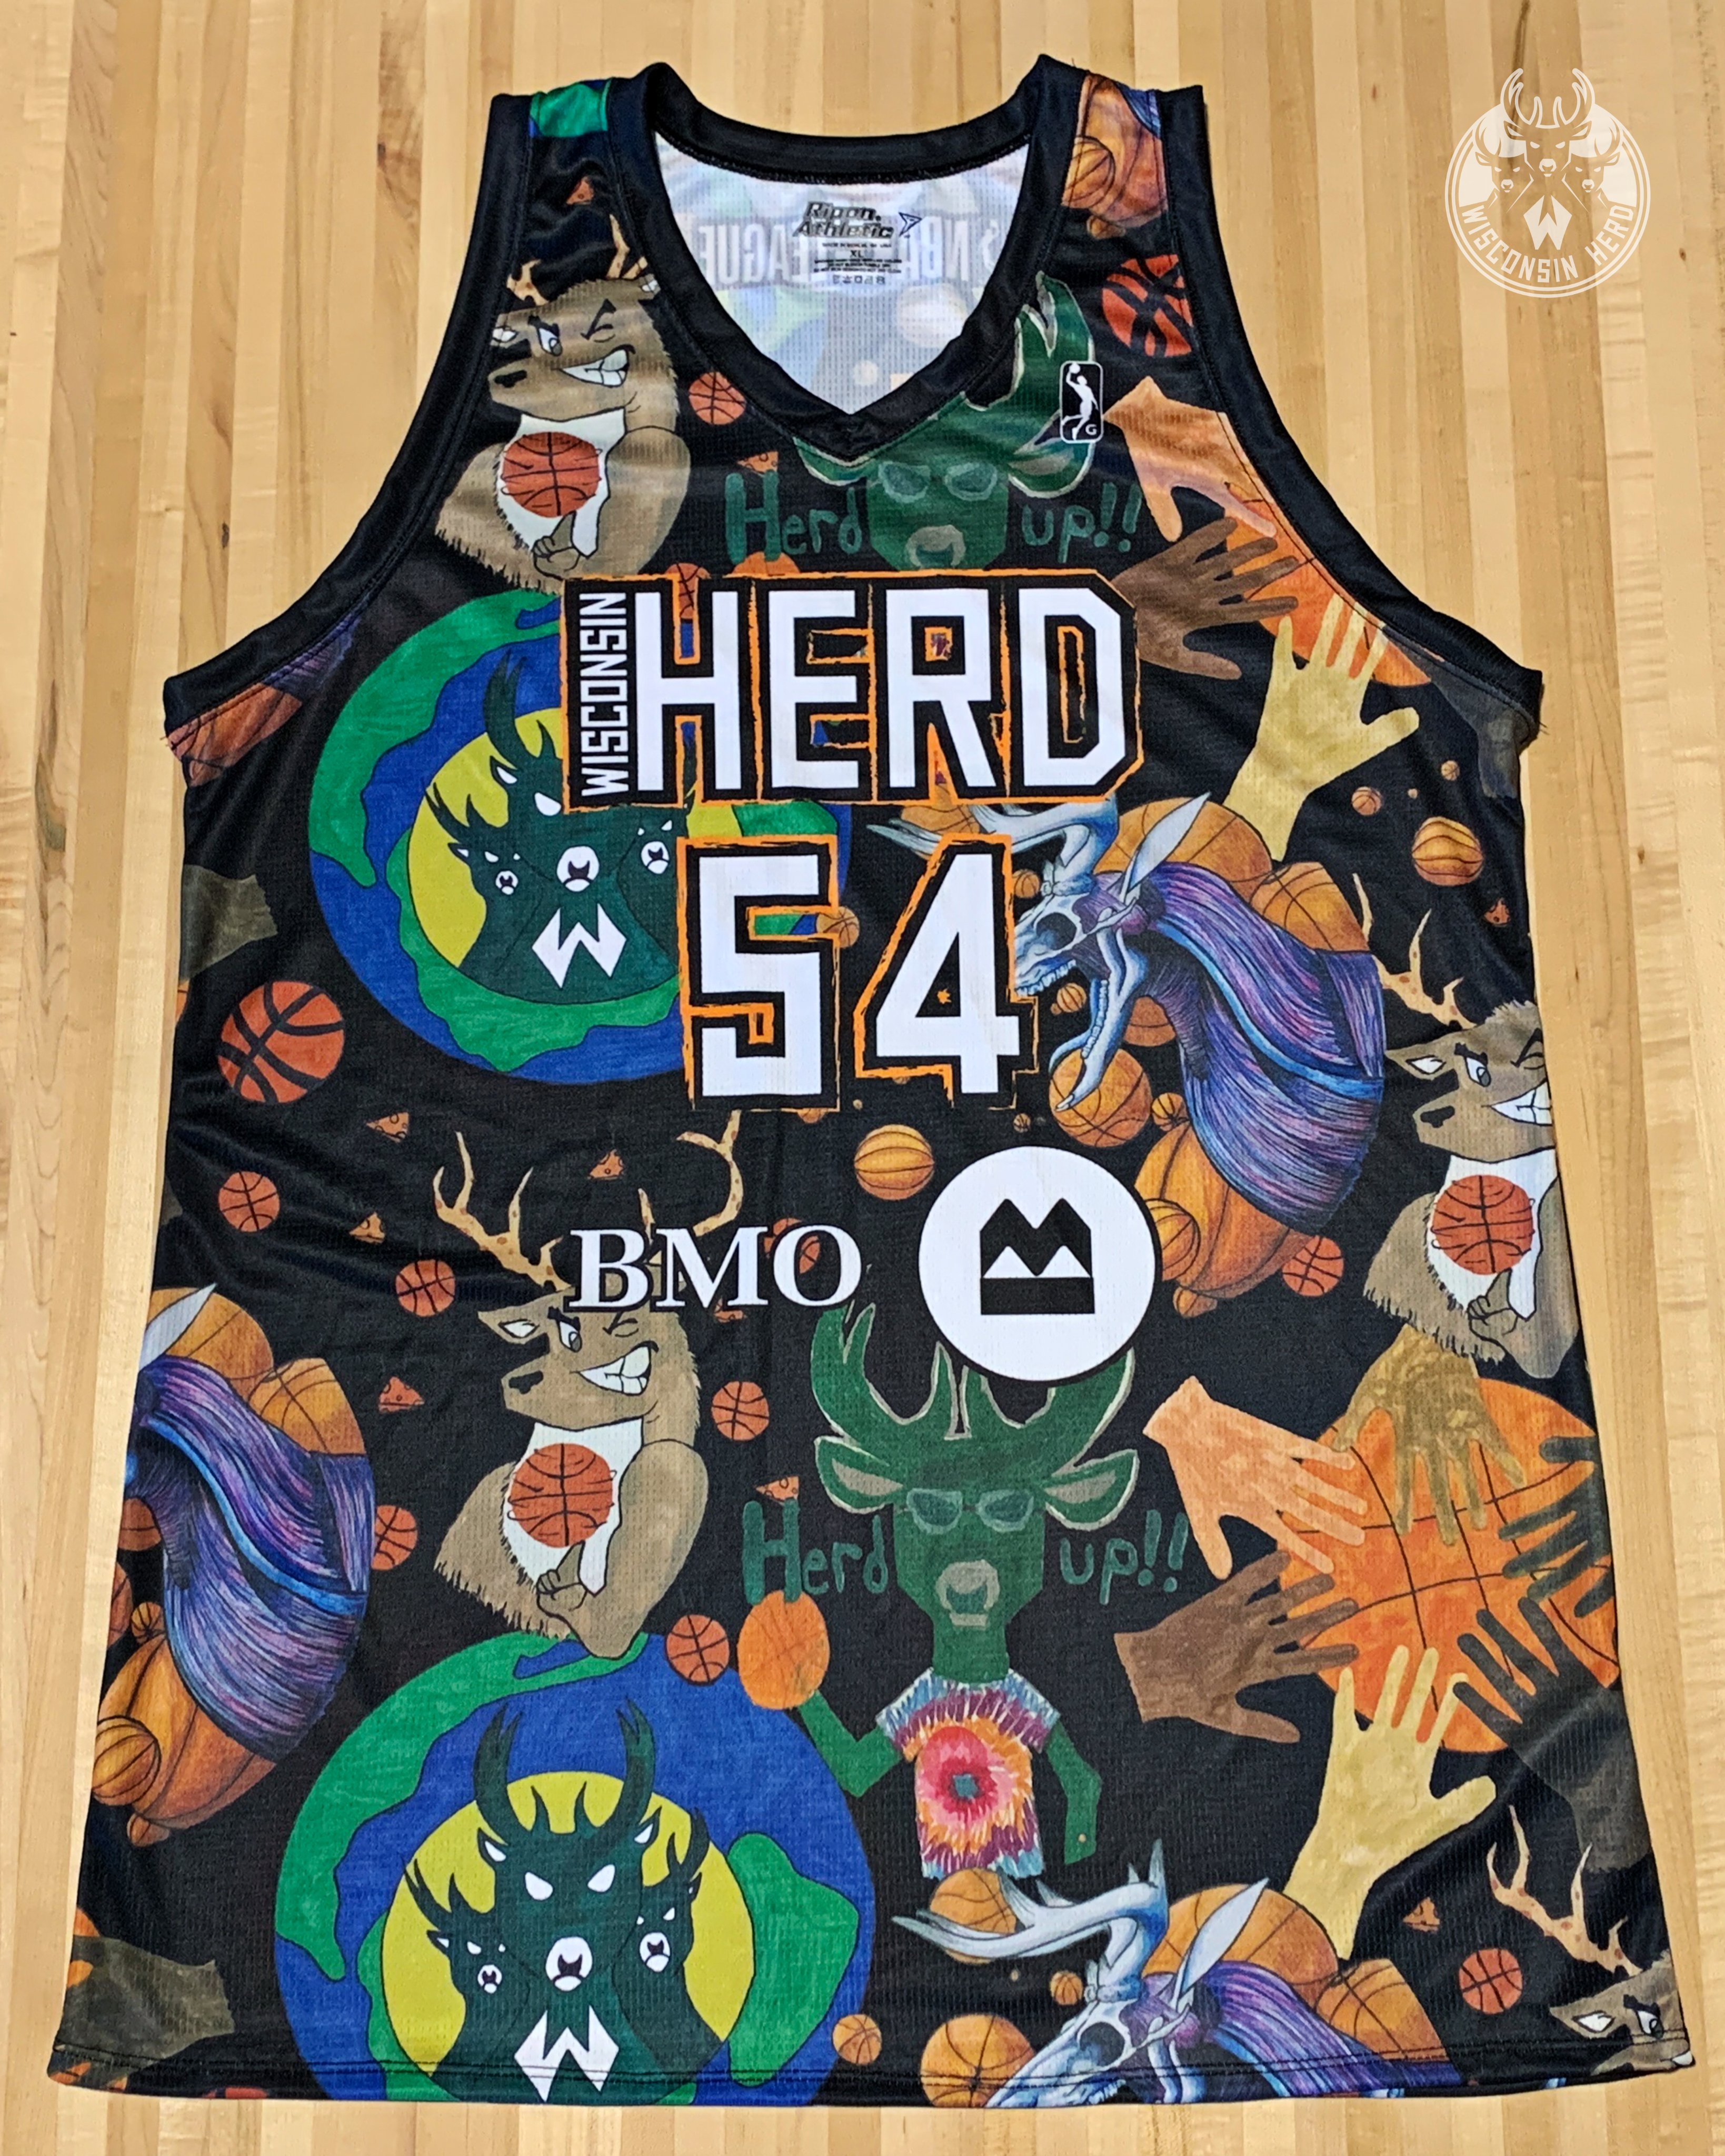 Wisconsin Herd on Twitter: "Designed by our community, for ...